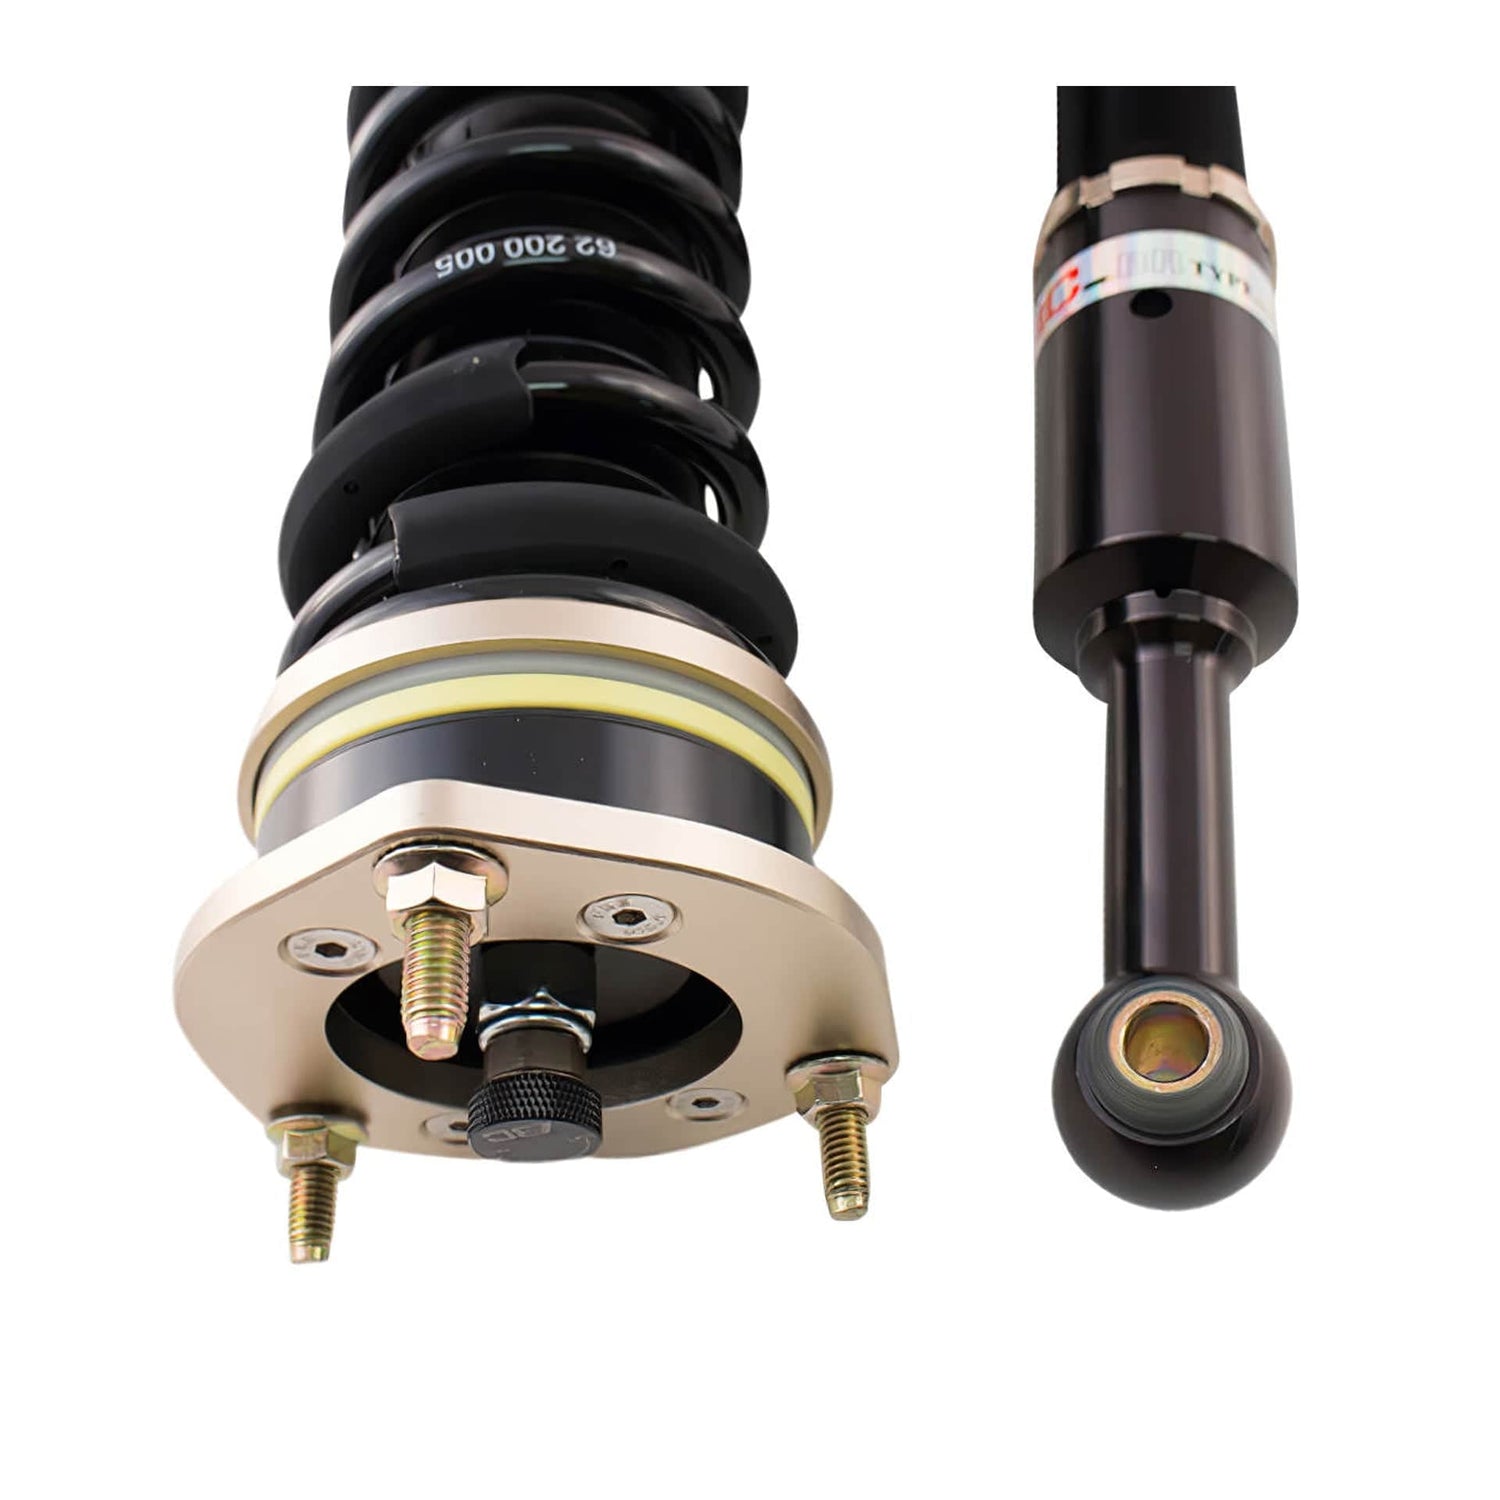 BC Racing BR Series Coilovers for 2014-2019 Ford Fiesta ST (MK6) E-13-BR